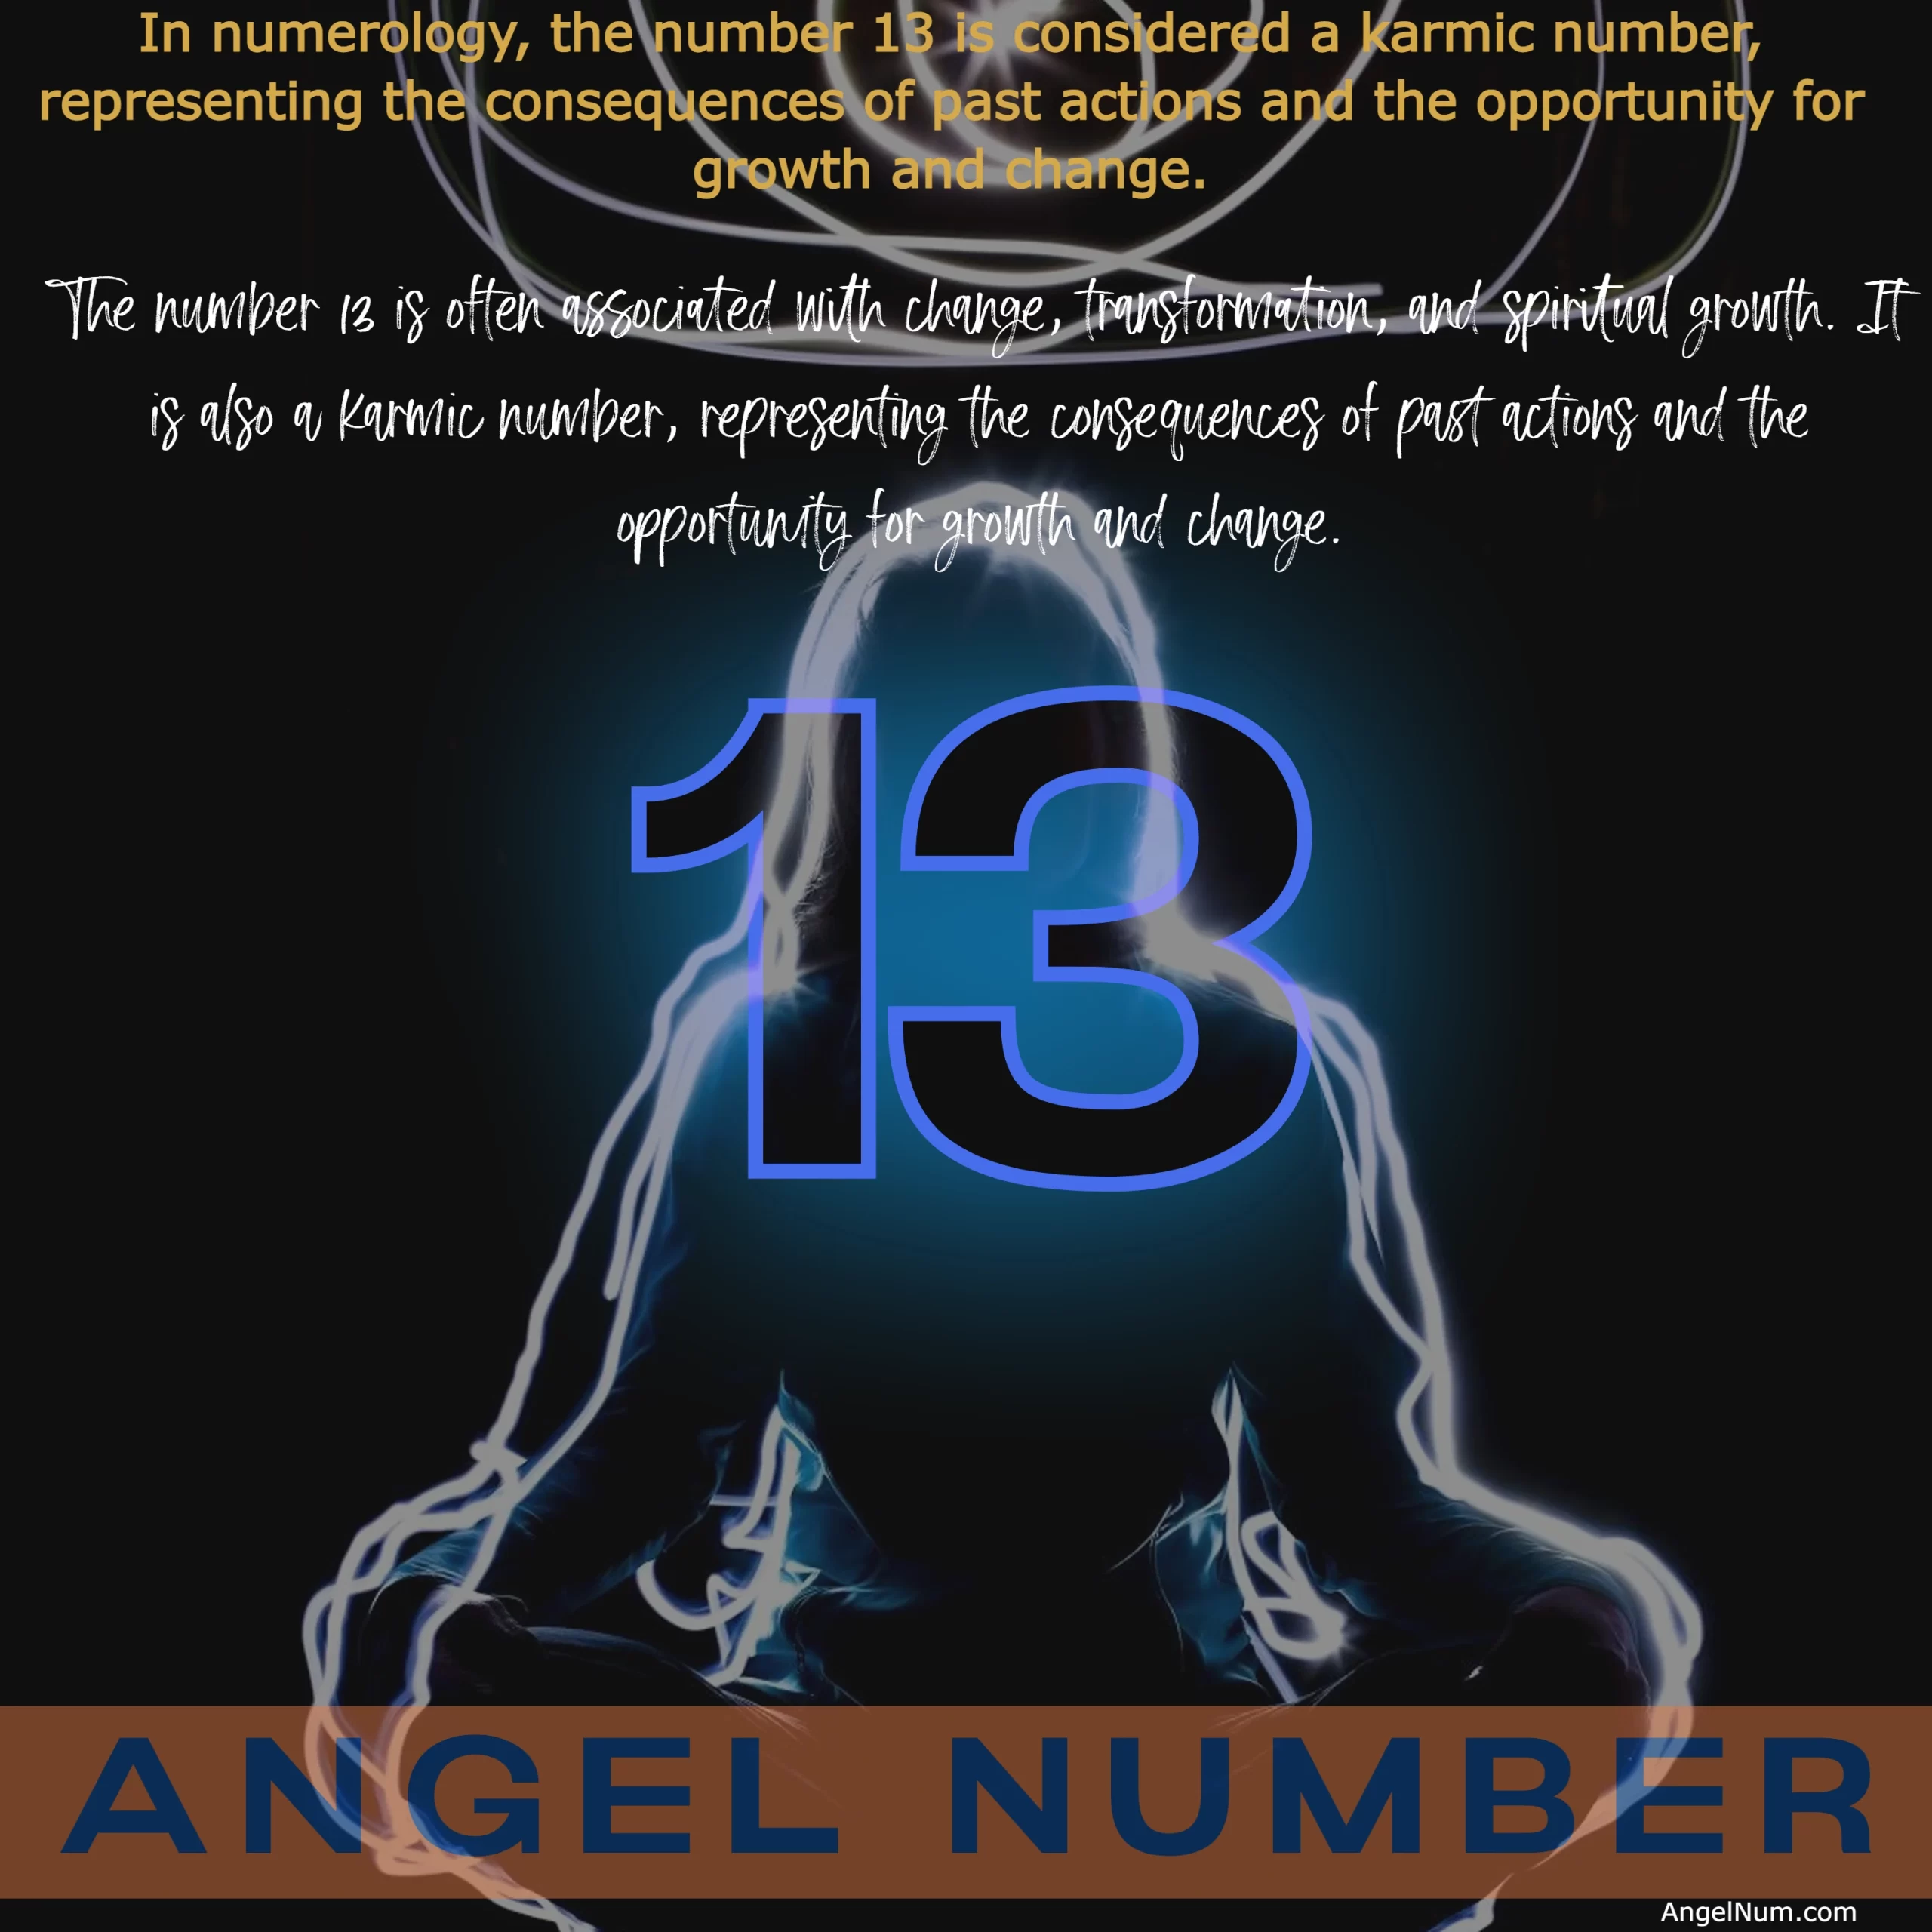 Discover the Meaning of Angel Number 13 and its Powerful Symbolism